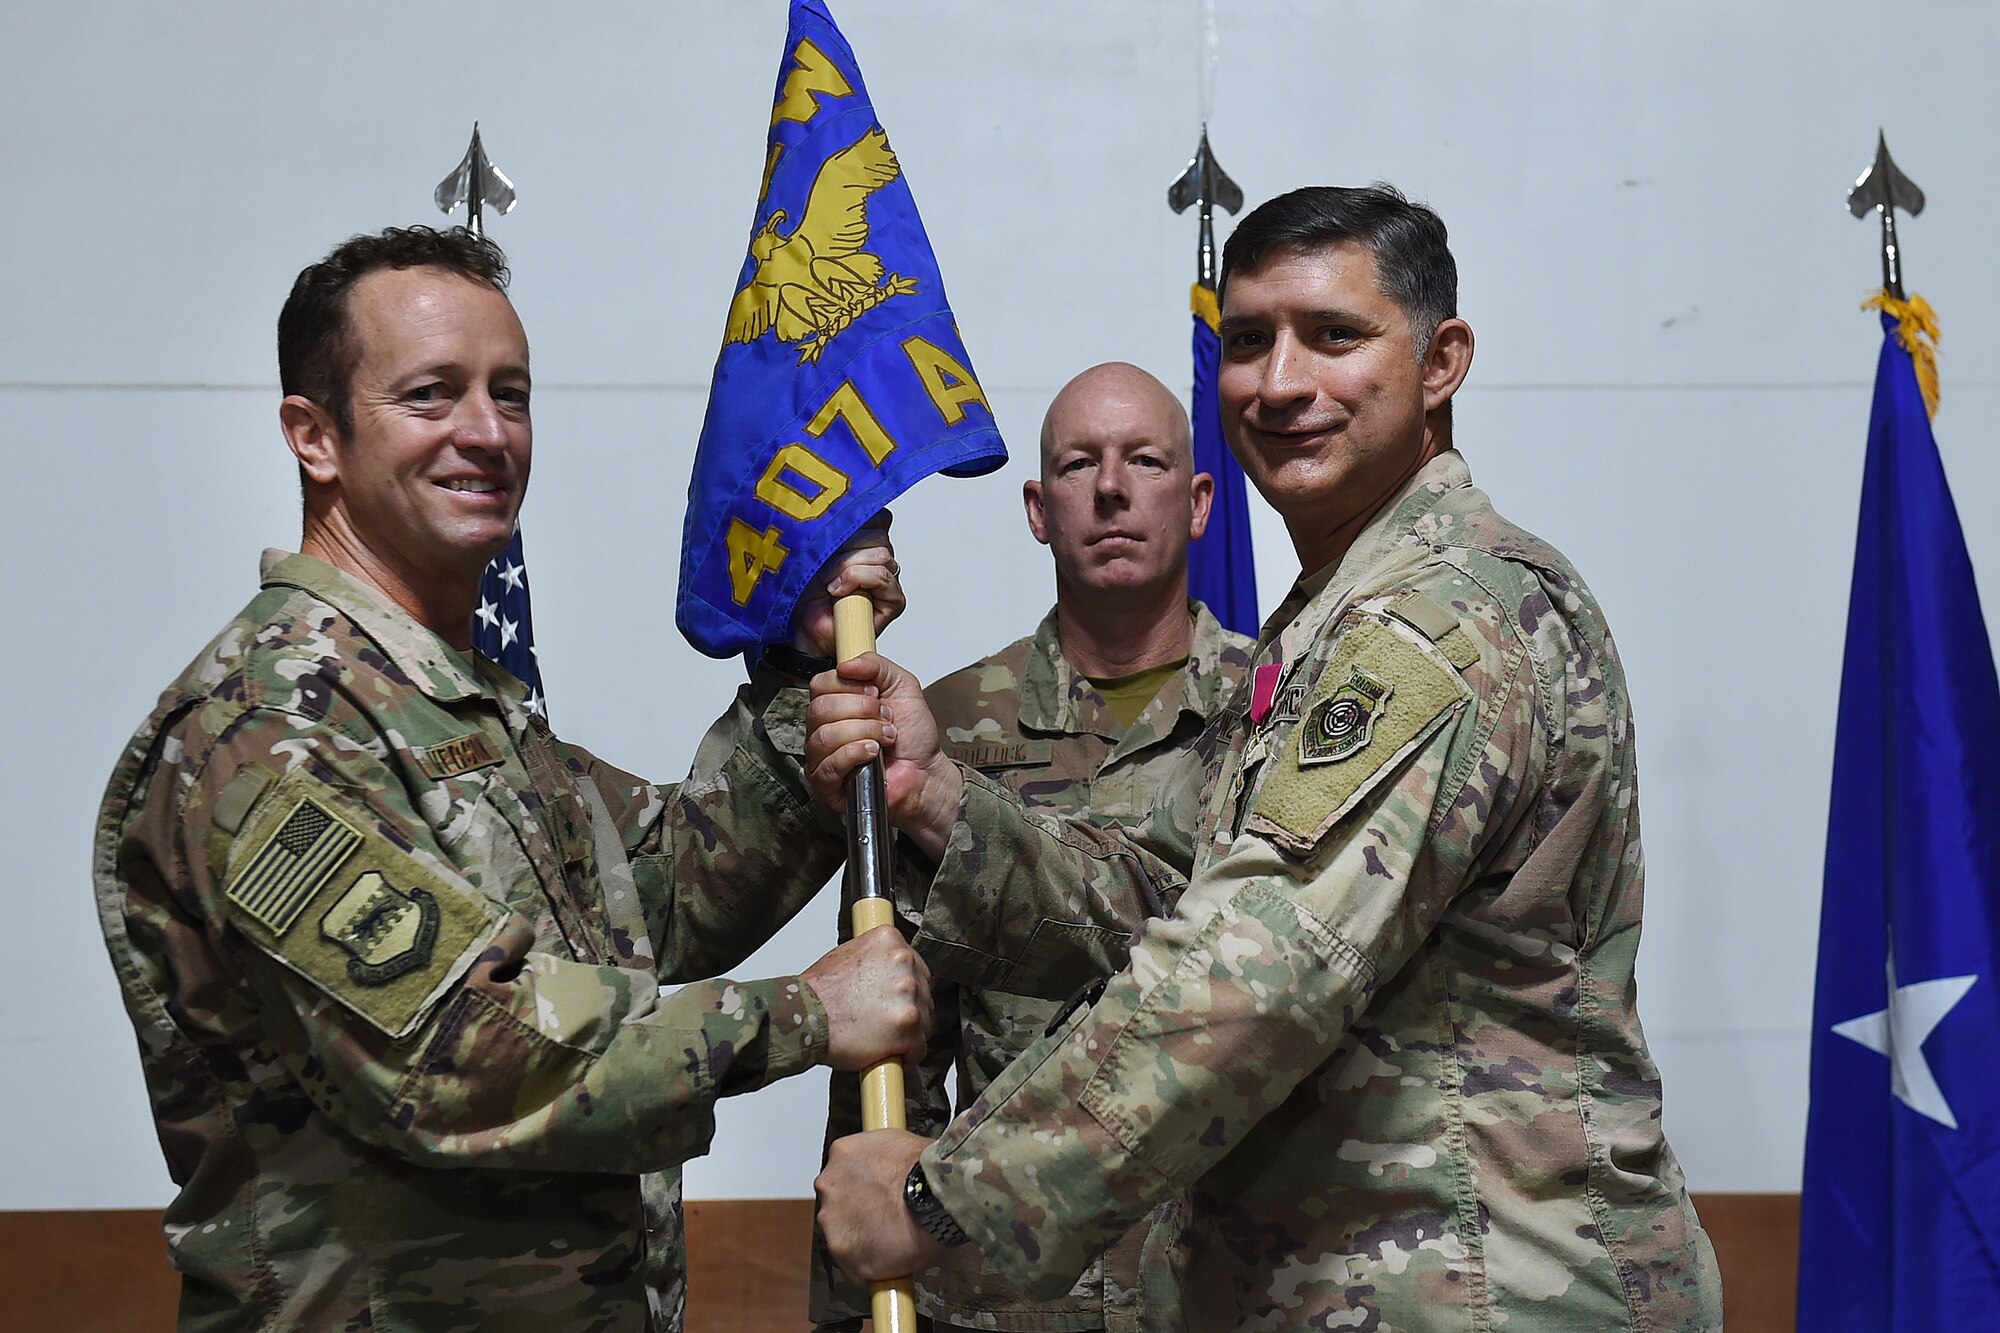 two airmen pose for a photo holding a guidon